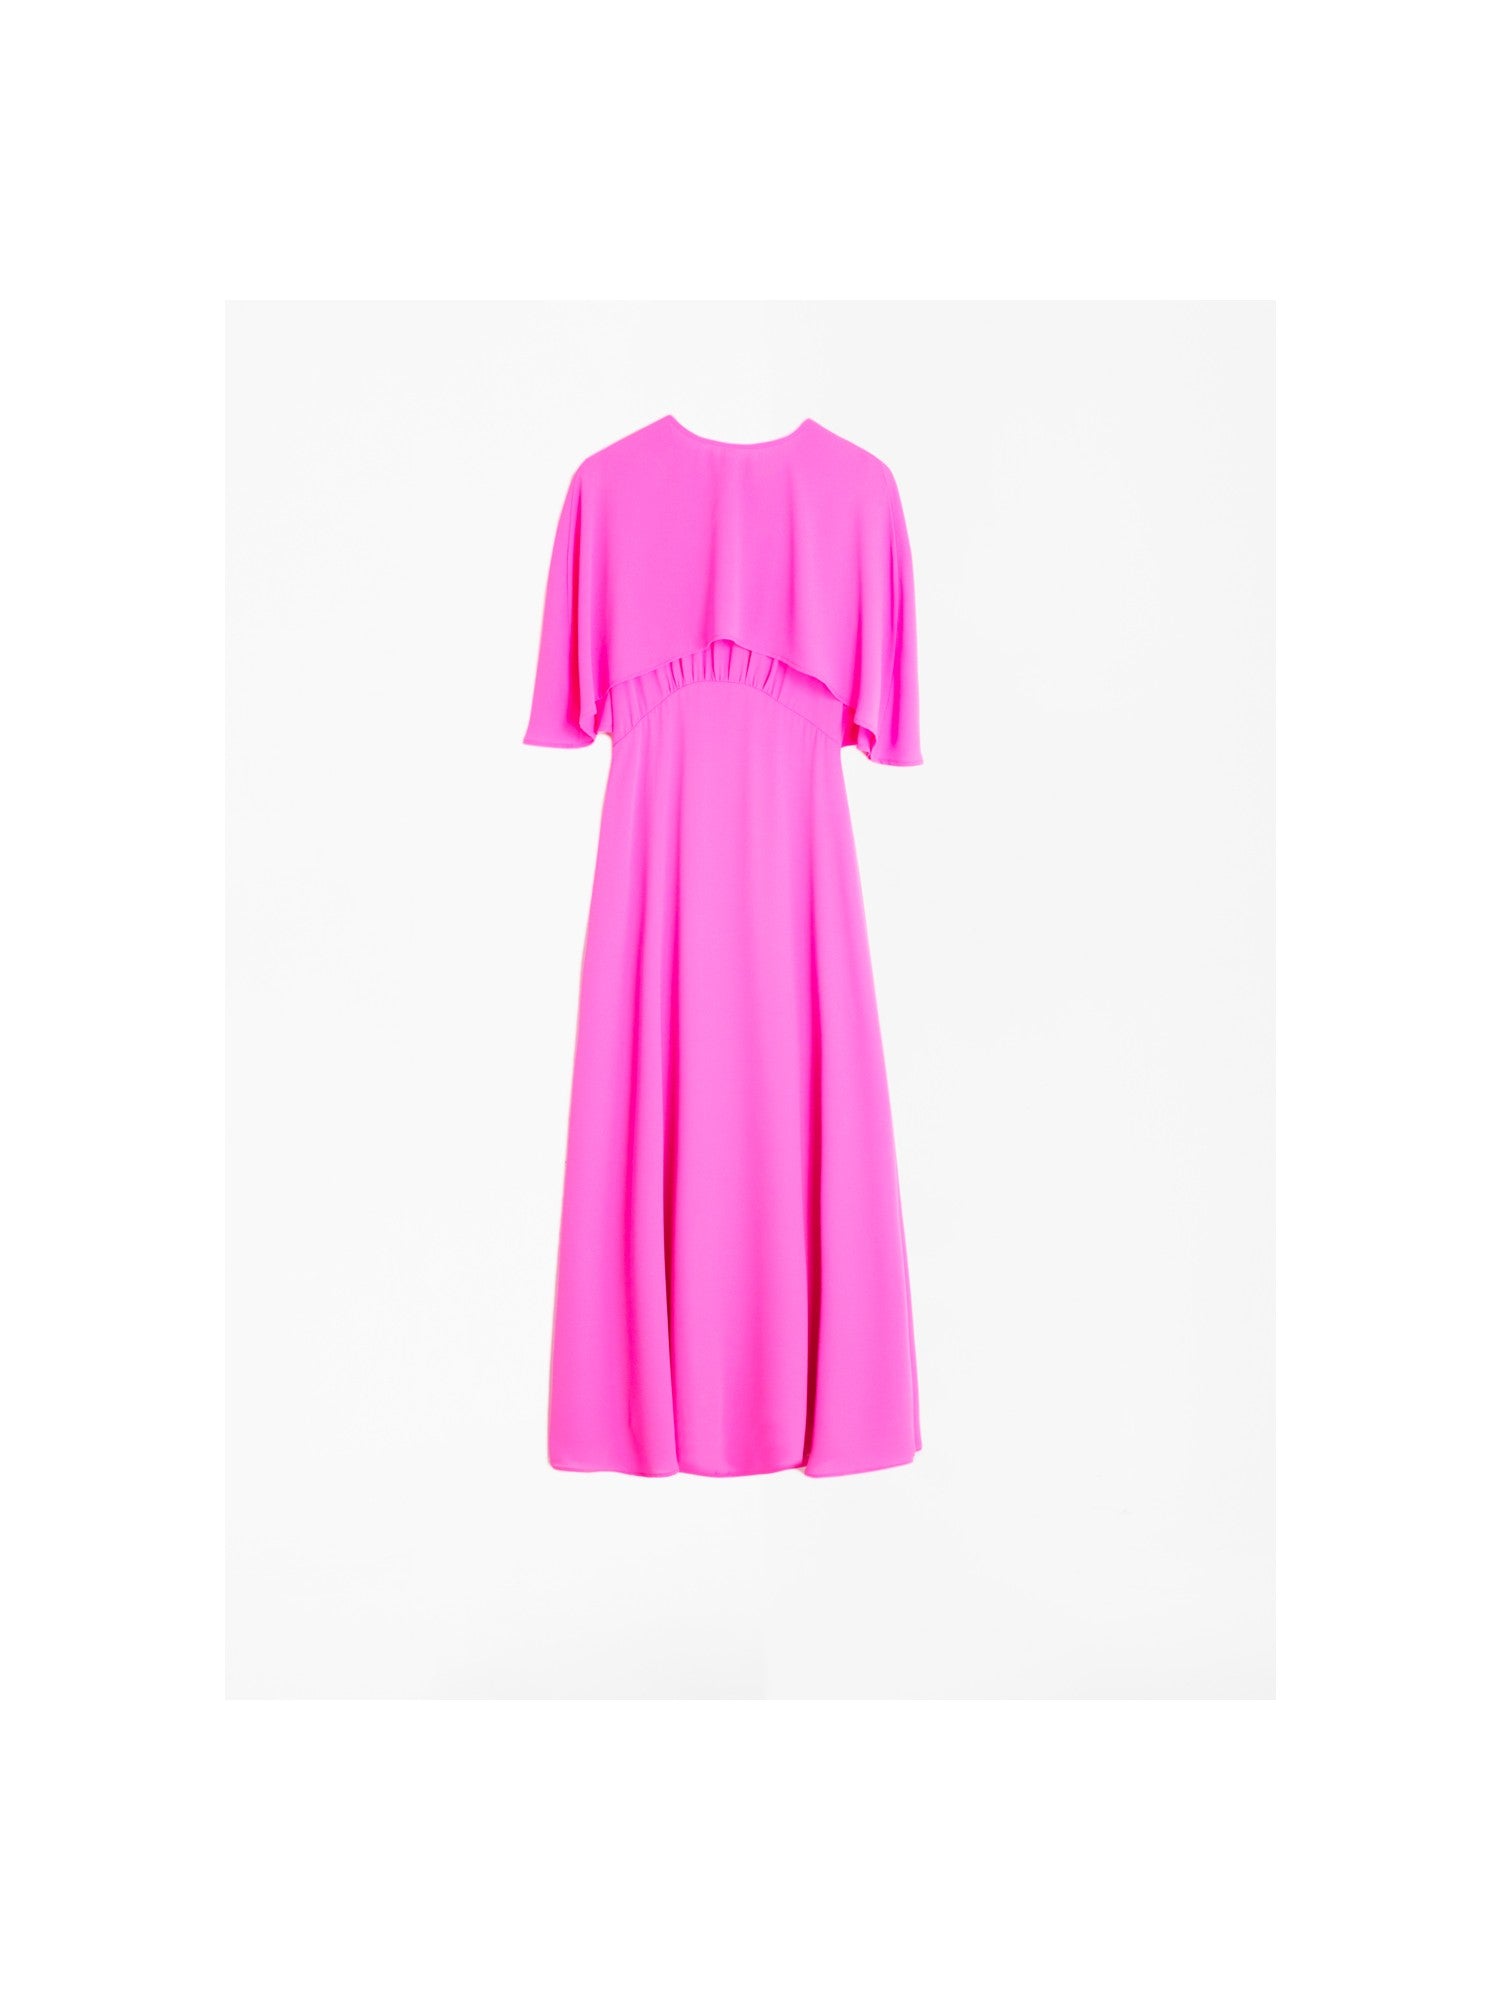 Georgette Maxi Dress in Pink with Removable Cape